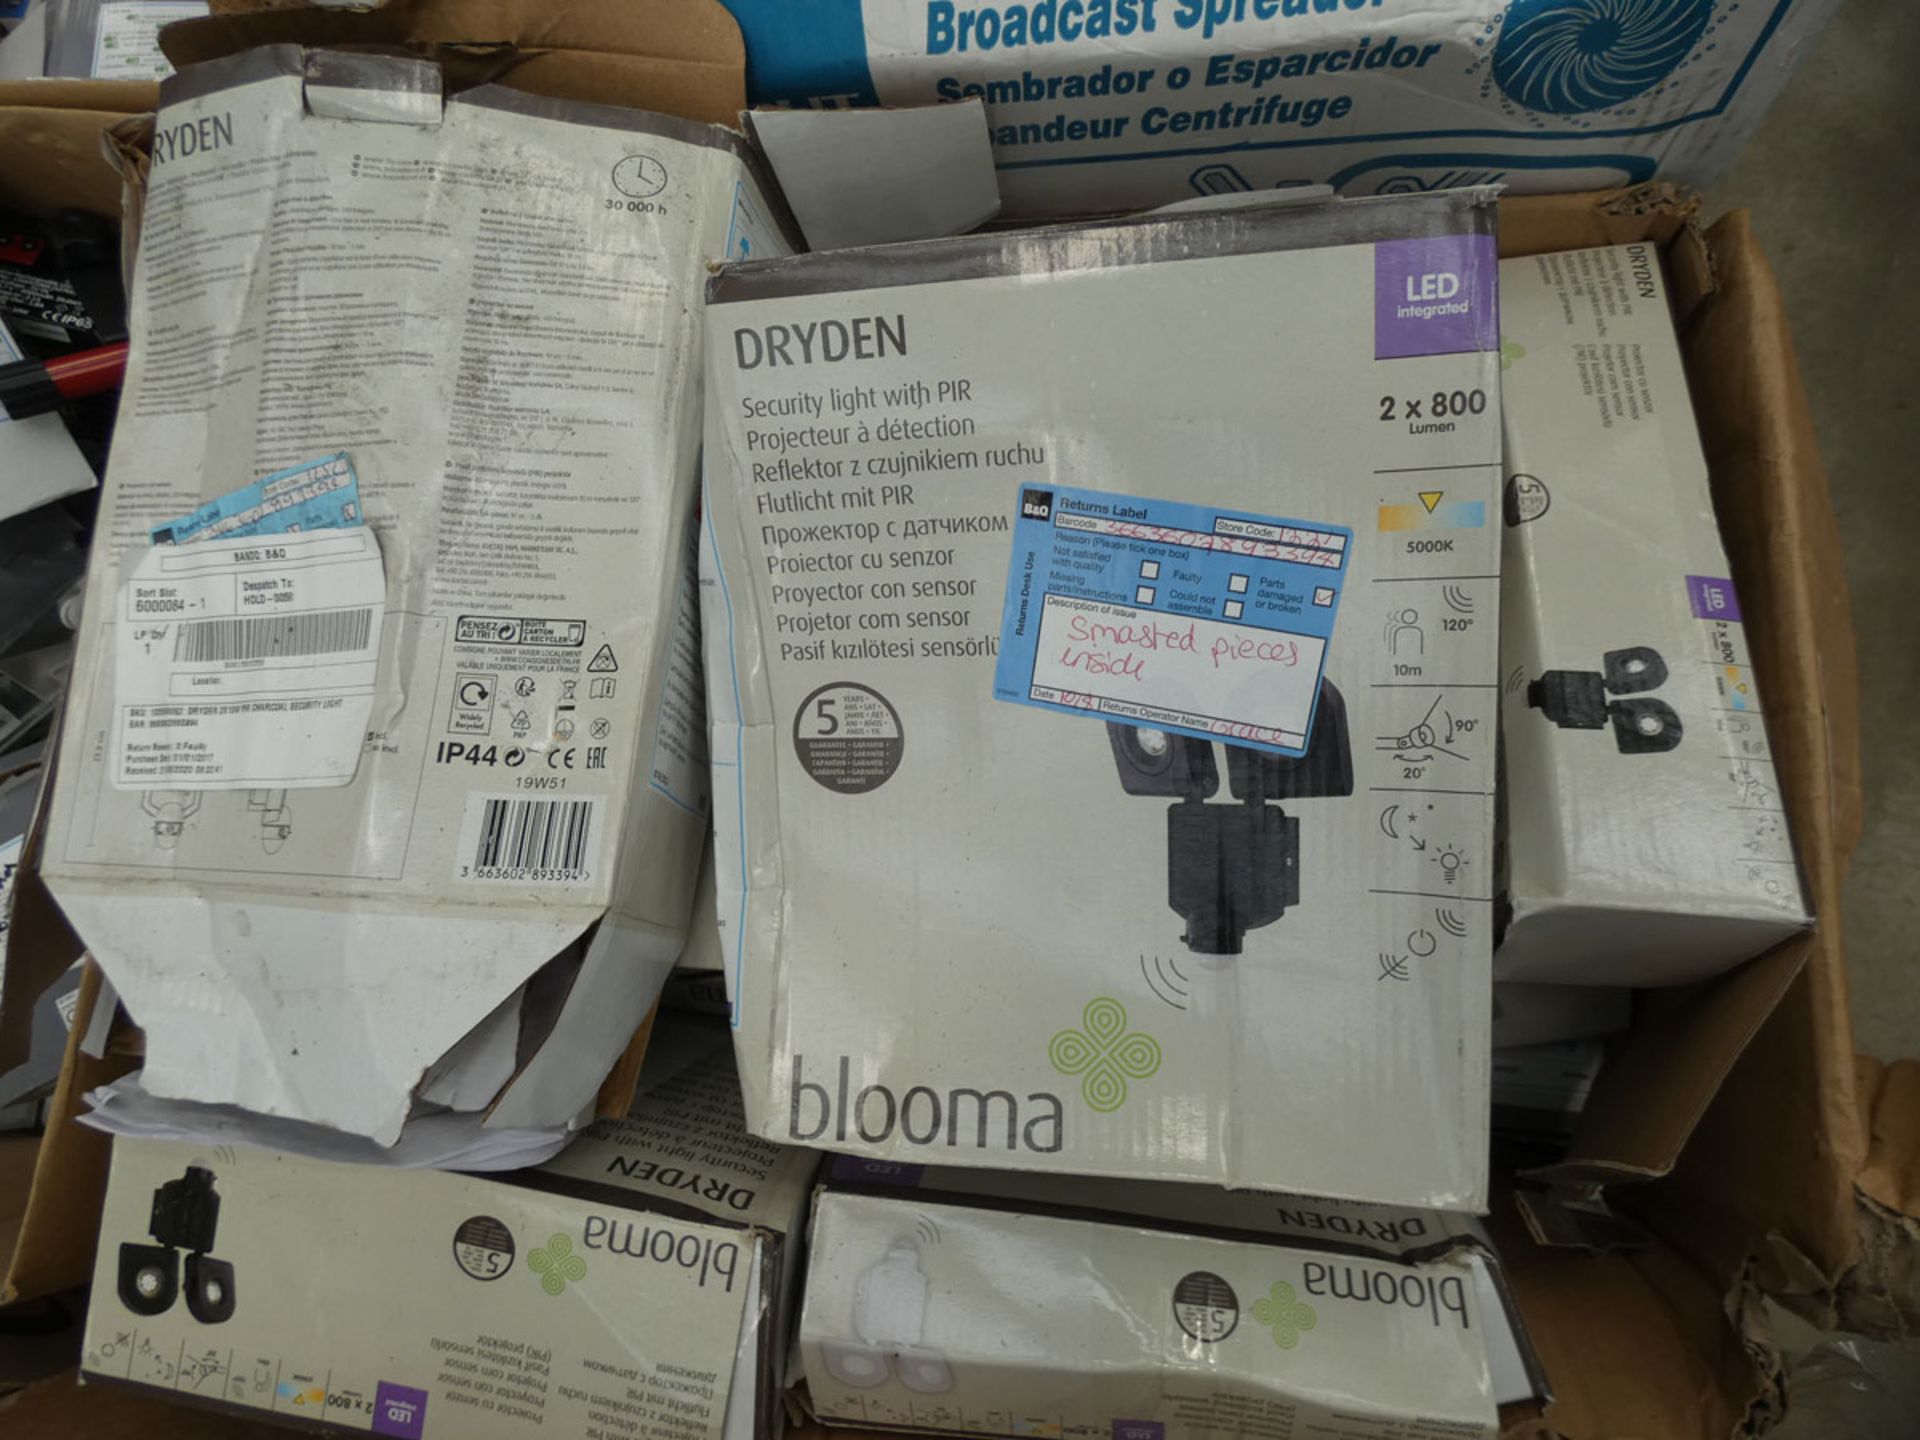 Box of Blooma security lights